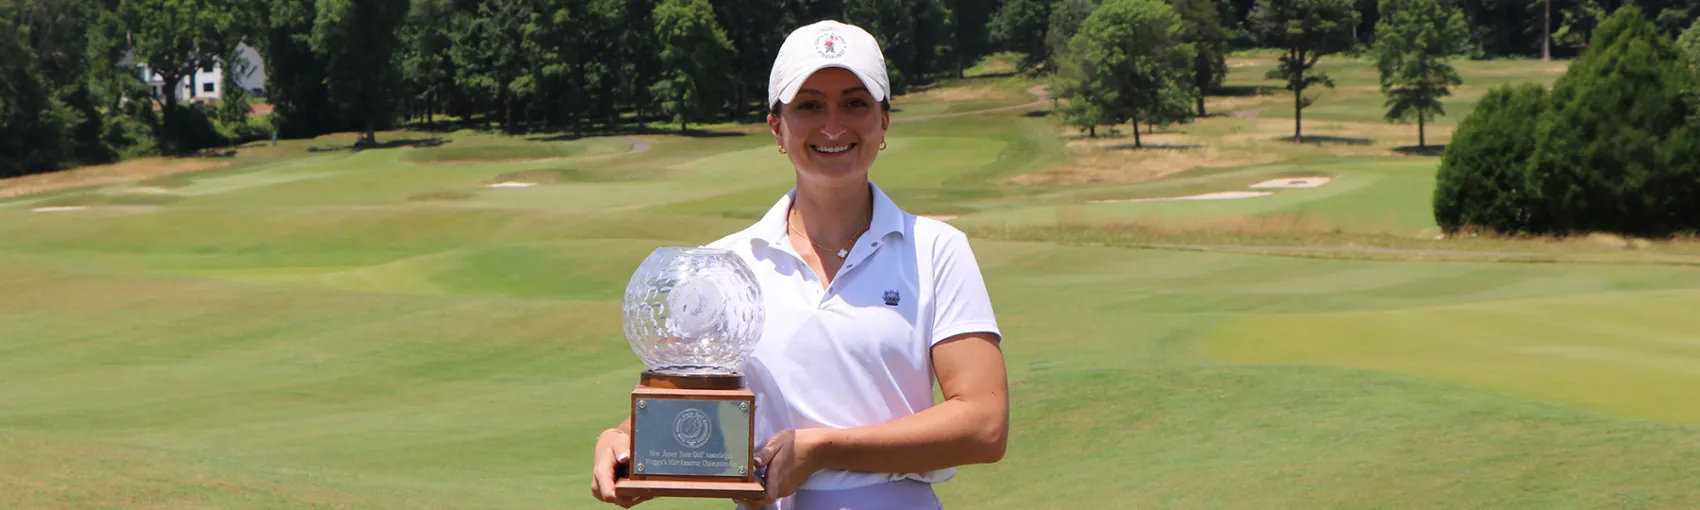 Parsells Wins 11th Women’s Mid-Amateur; Li and Gianchandani Co-Medal Ahead of Match Play at 99th Women’s Amateur